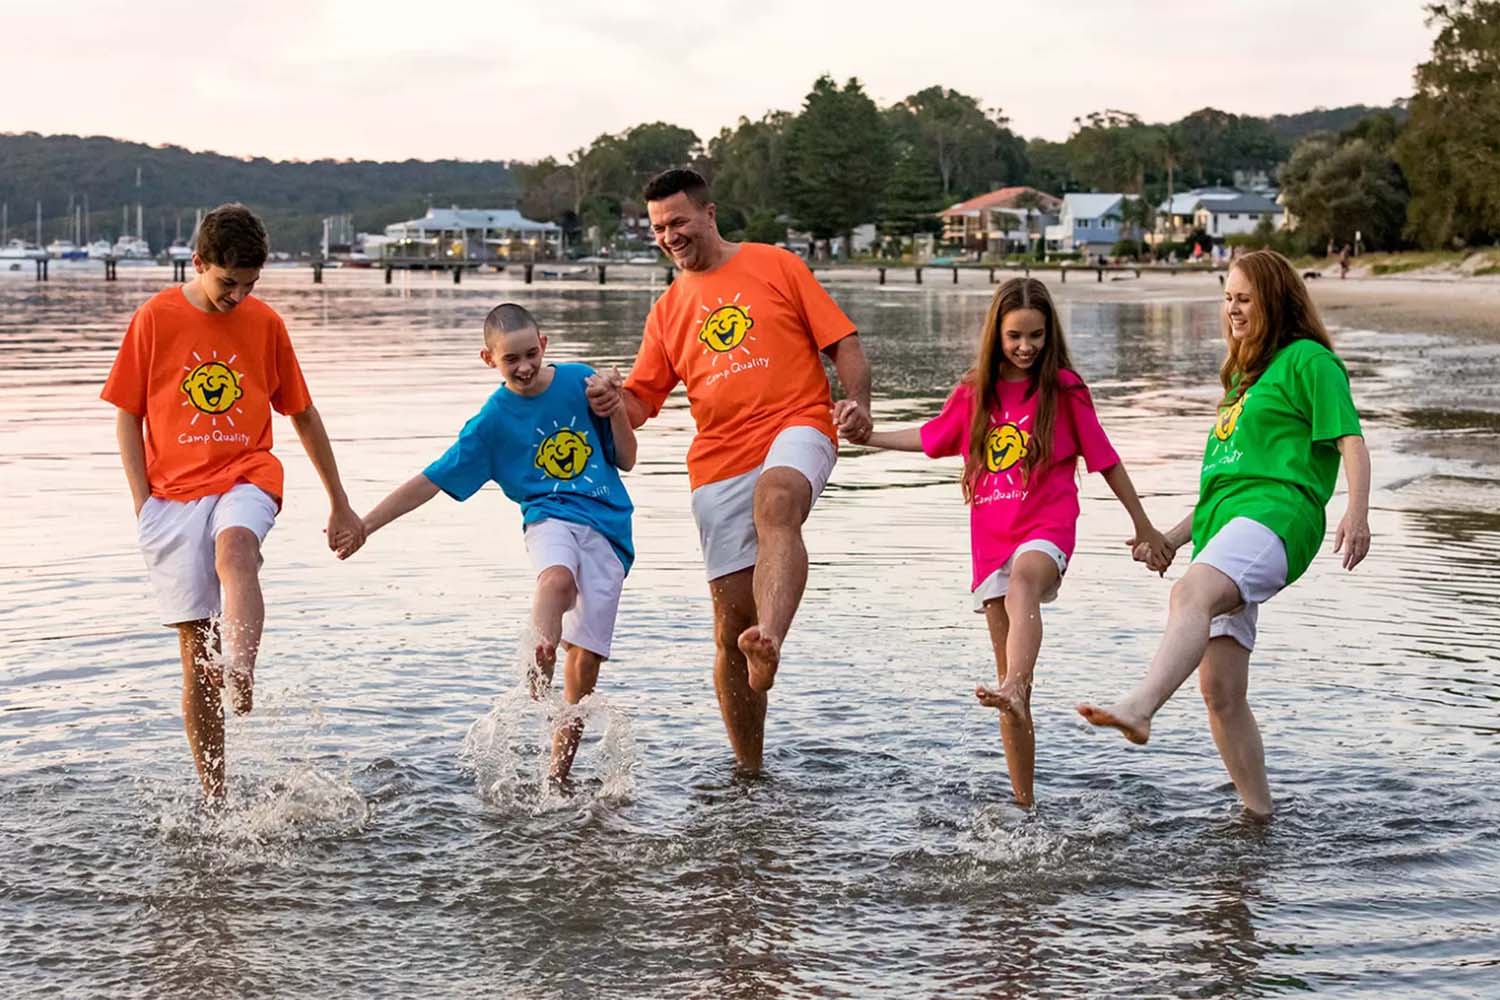 A family of 5 splash their feet in a bay at sunset